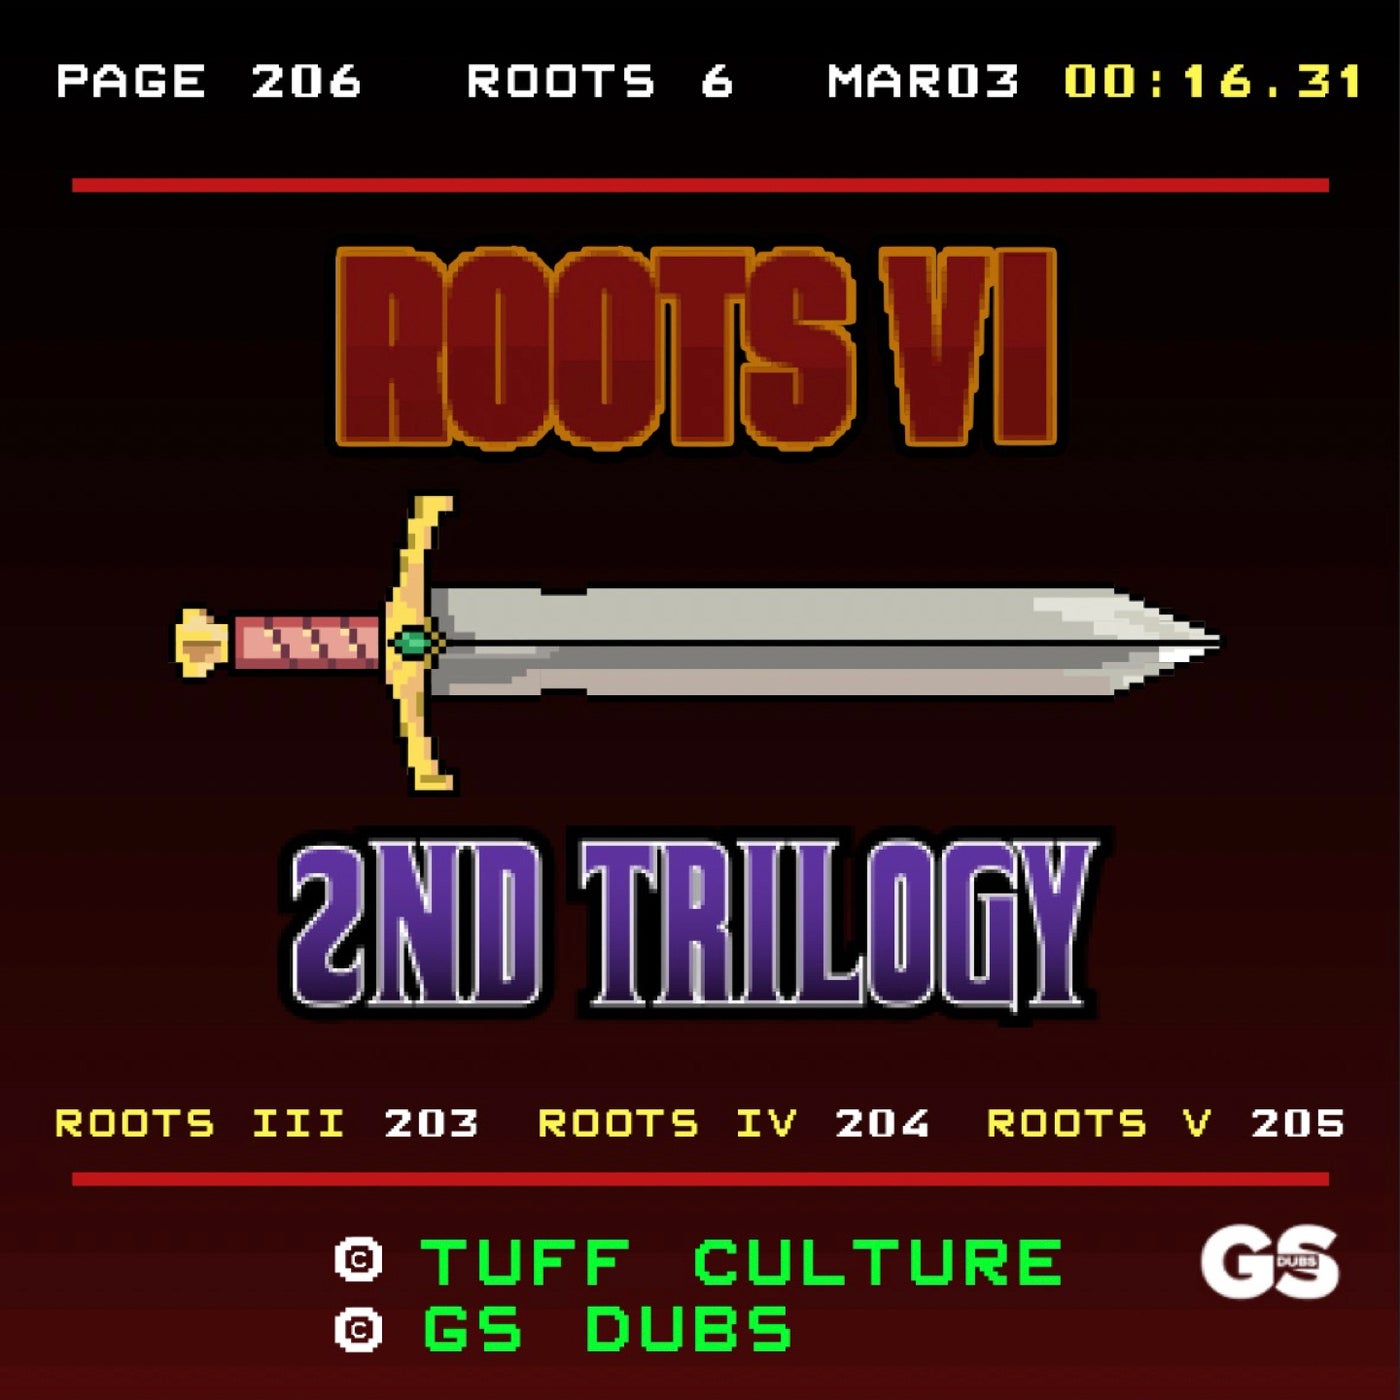 Roots VI - 2nd Trilogy